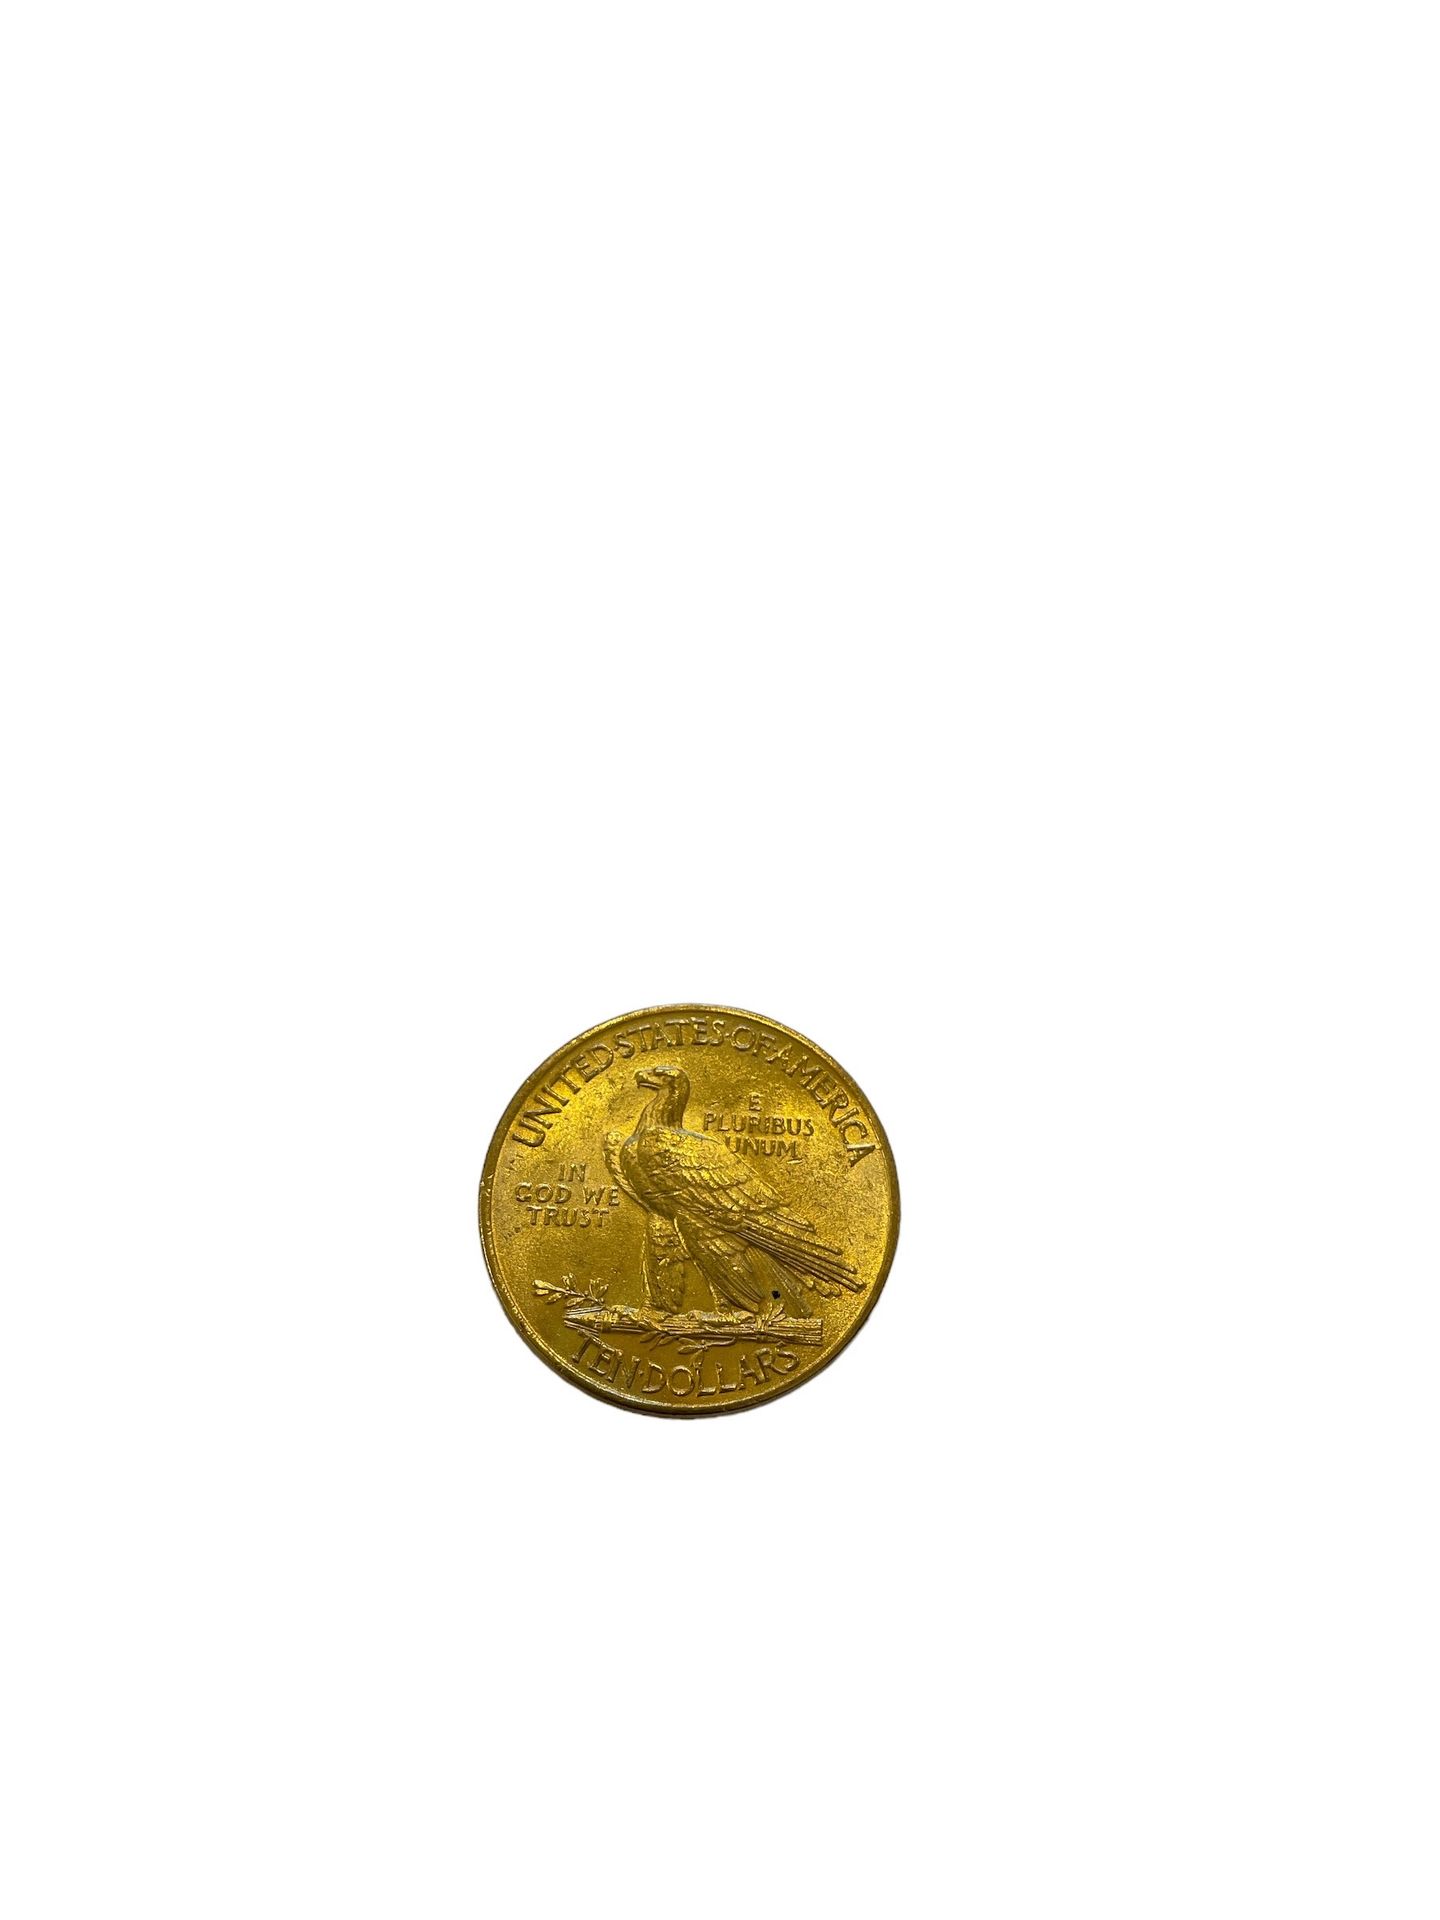 Null UNITED STATES
10 dollars gold
Weight : 16.7 g